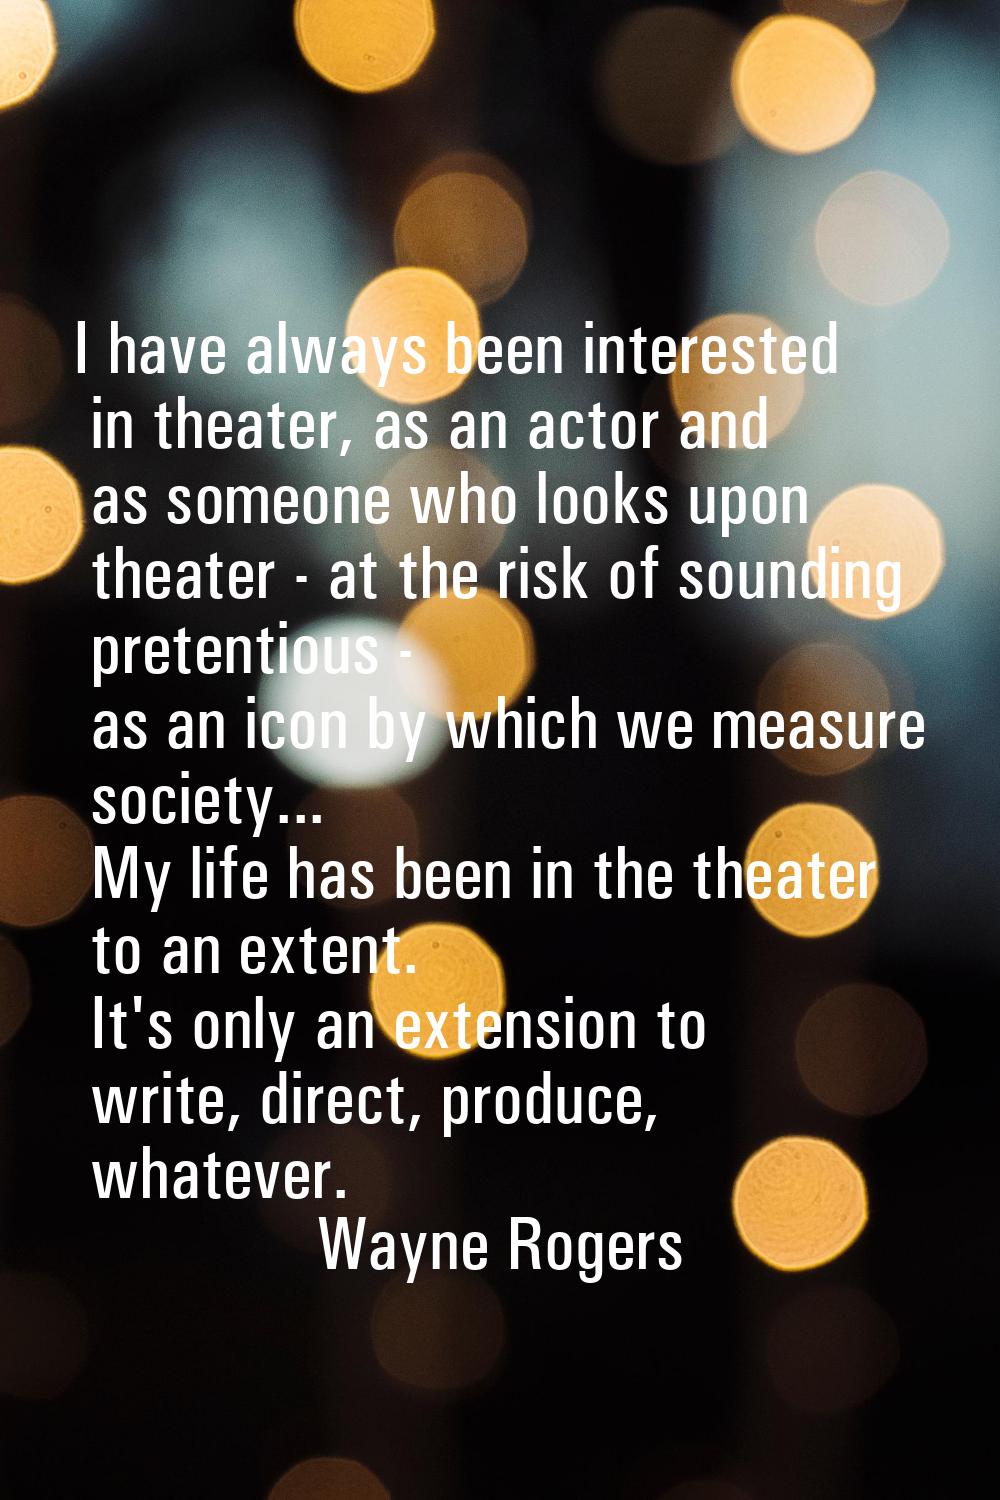 I have always been interested in theater, as an actor and as someone who looks upon theater - at th